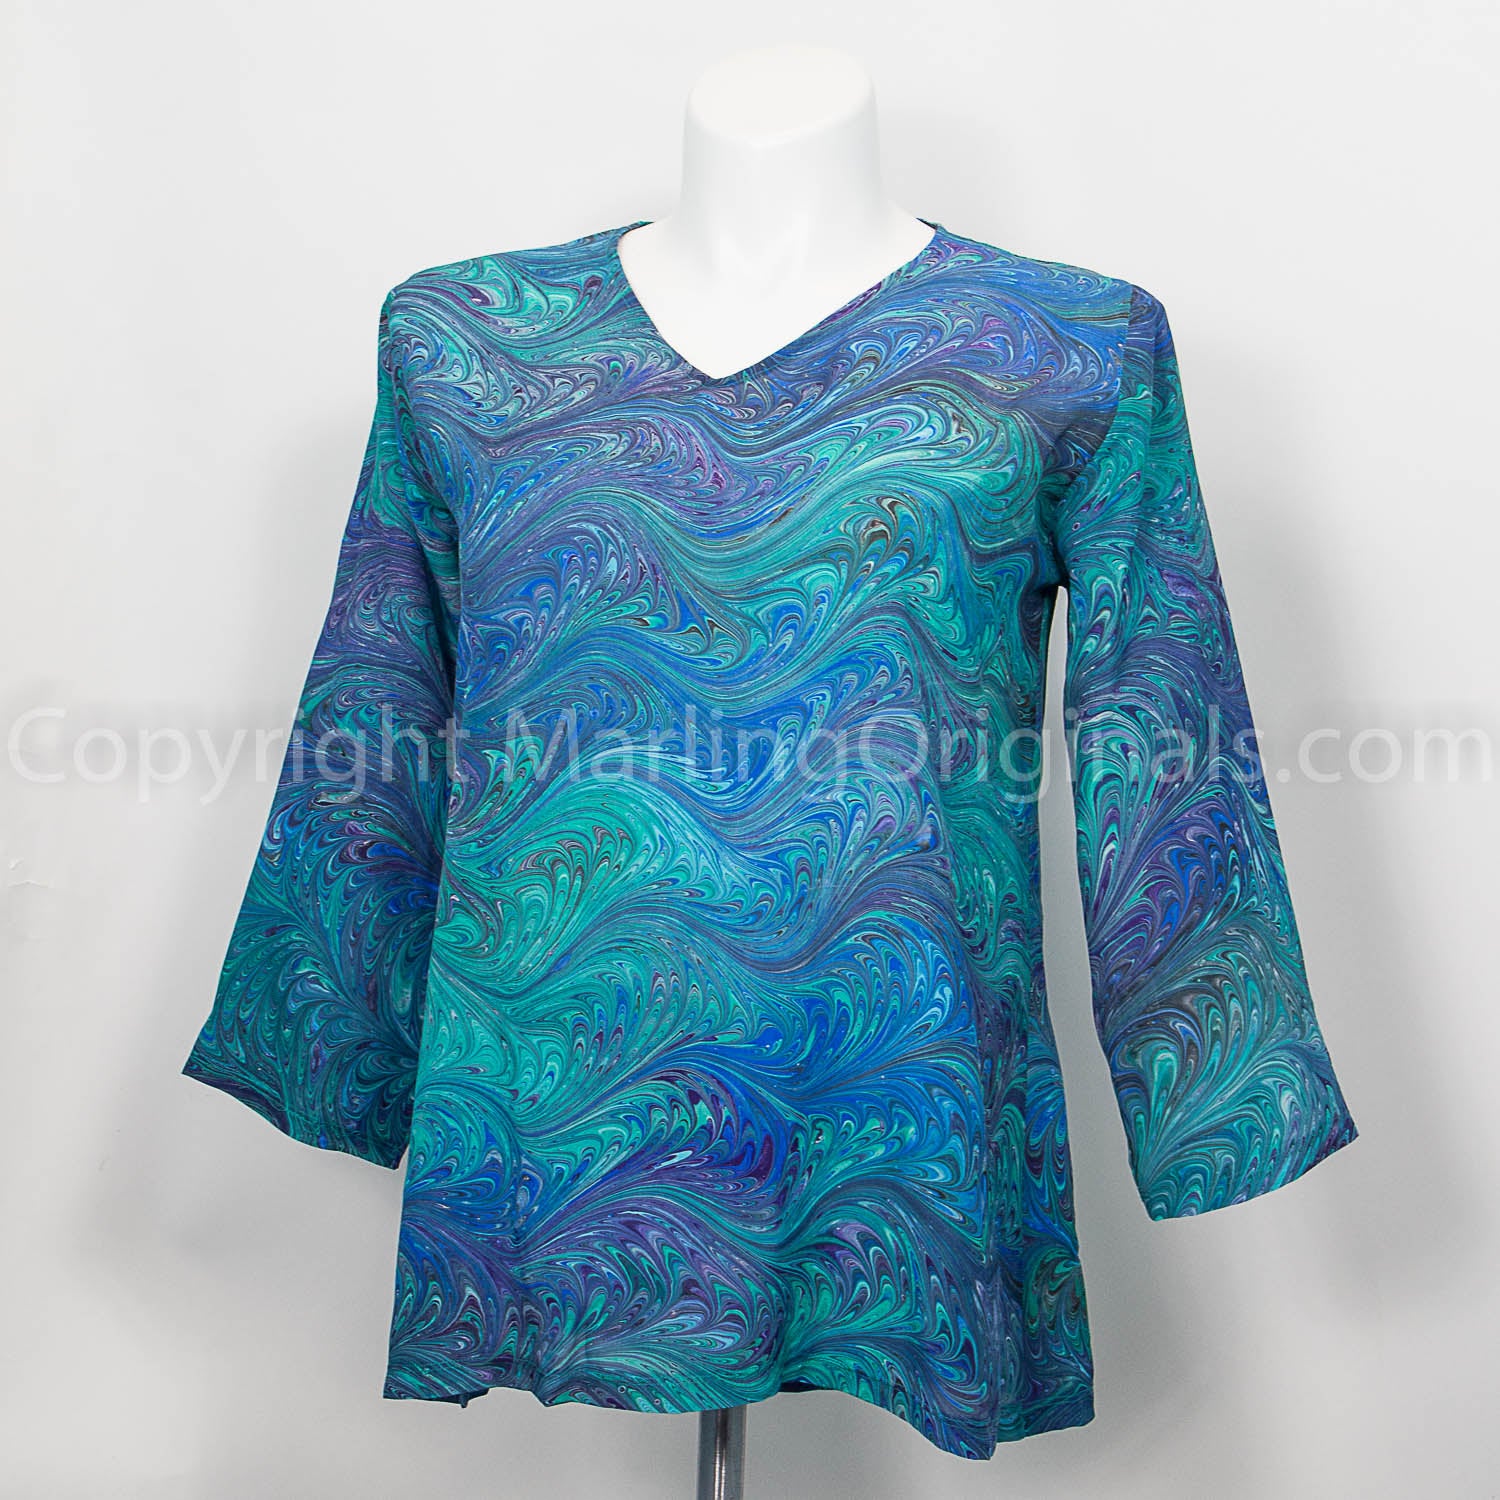 v neck silk tunic with 3/4 sleeves marbled in a feathery pattern in blue, green, purple